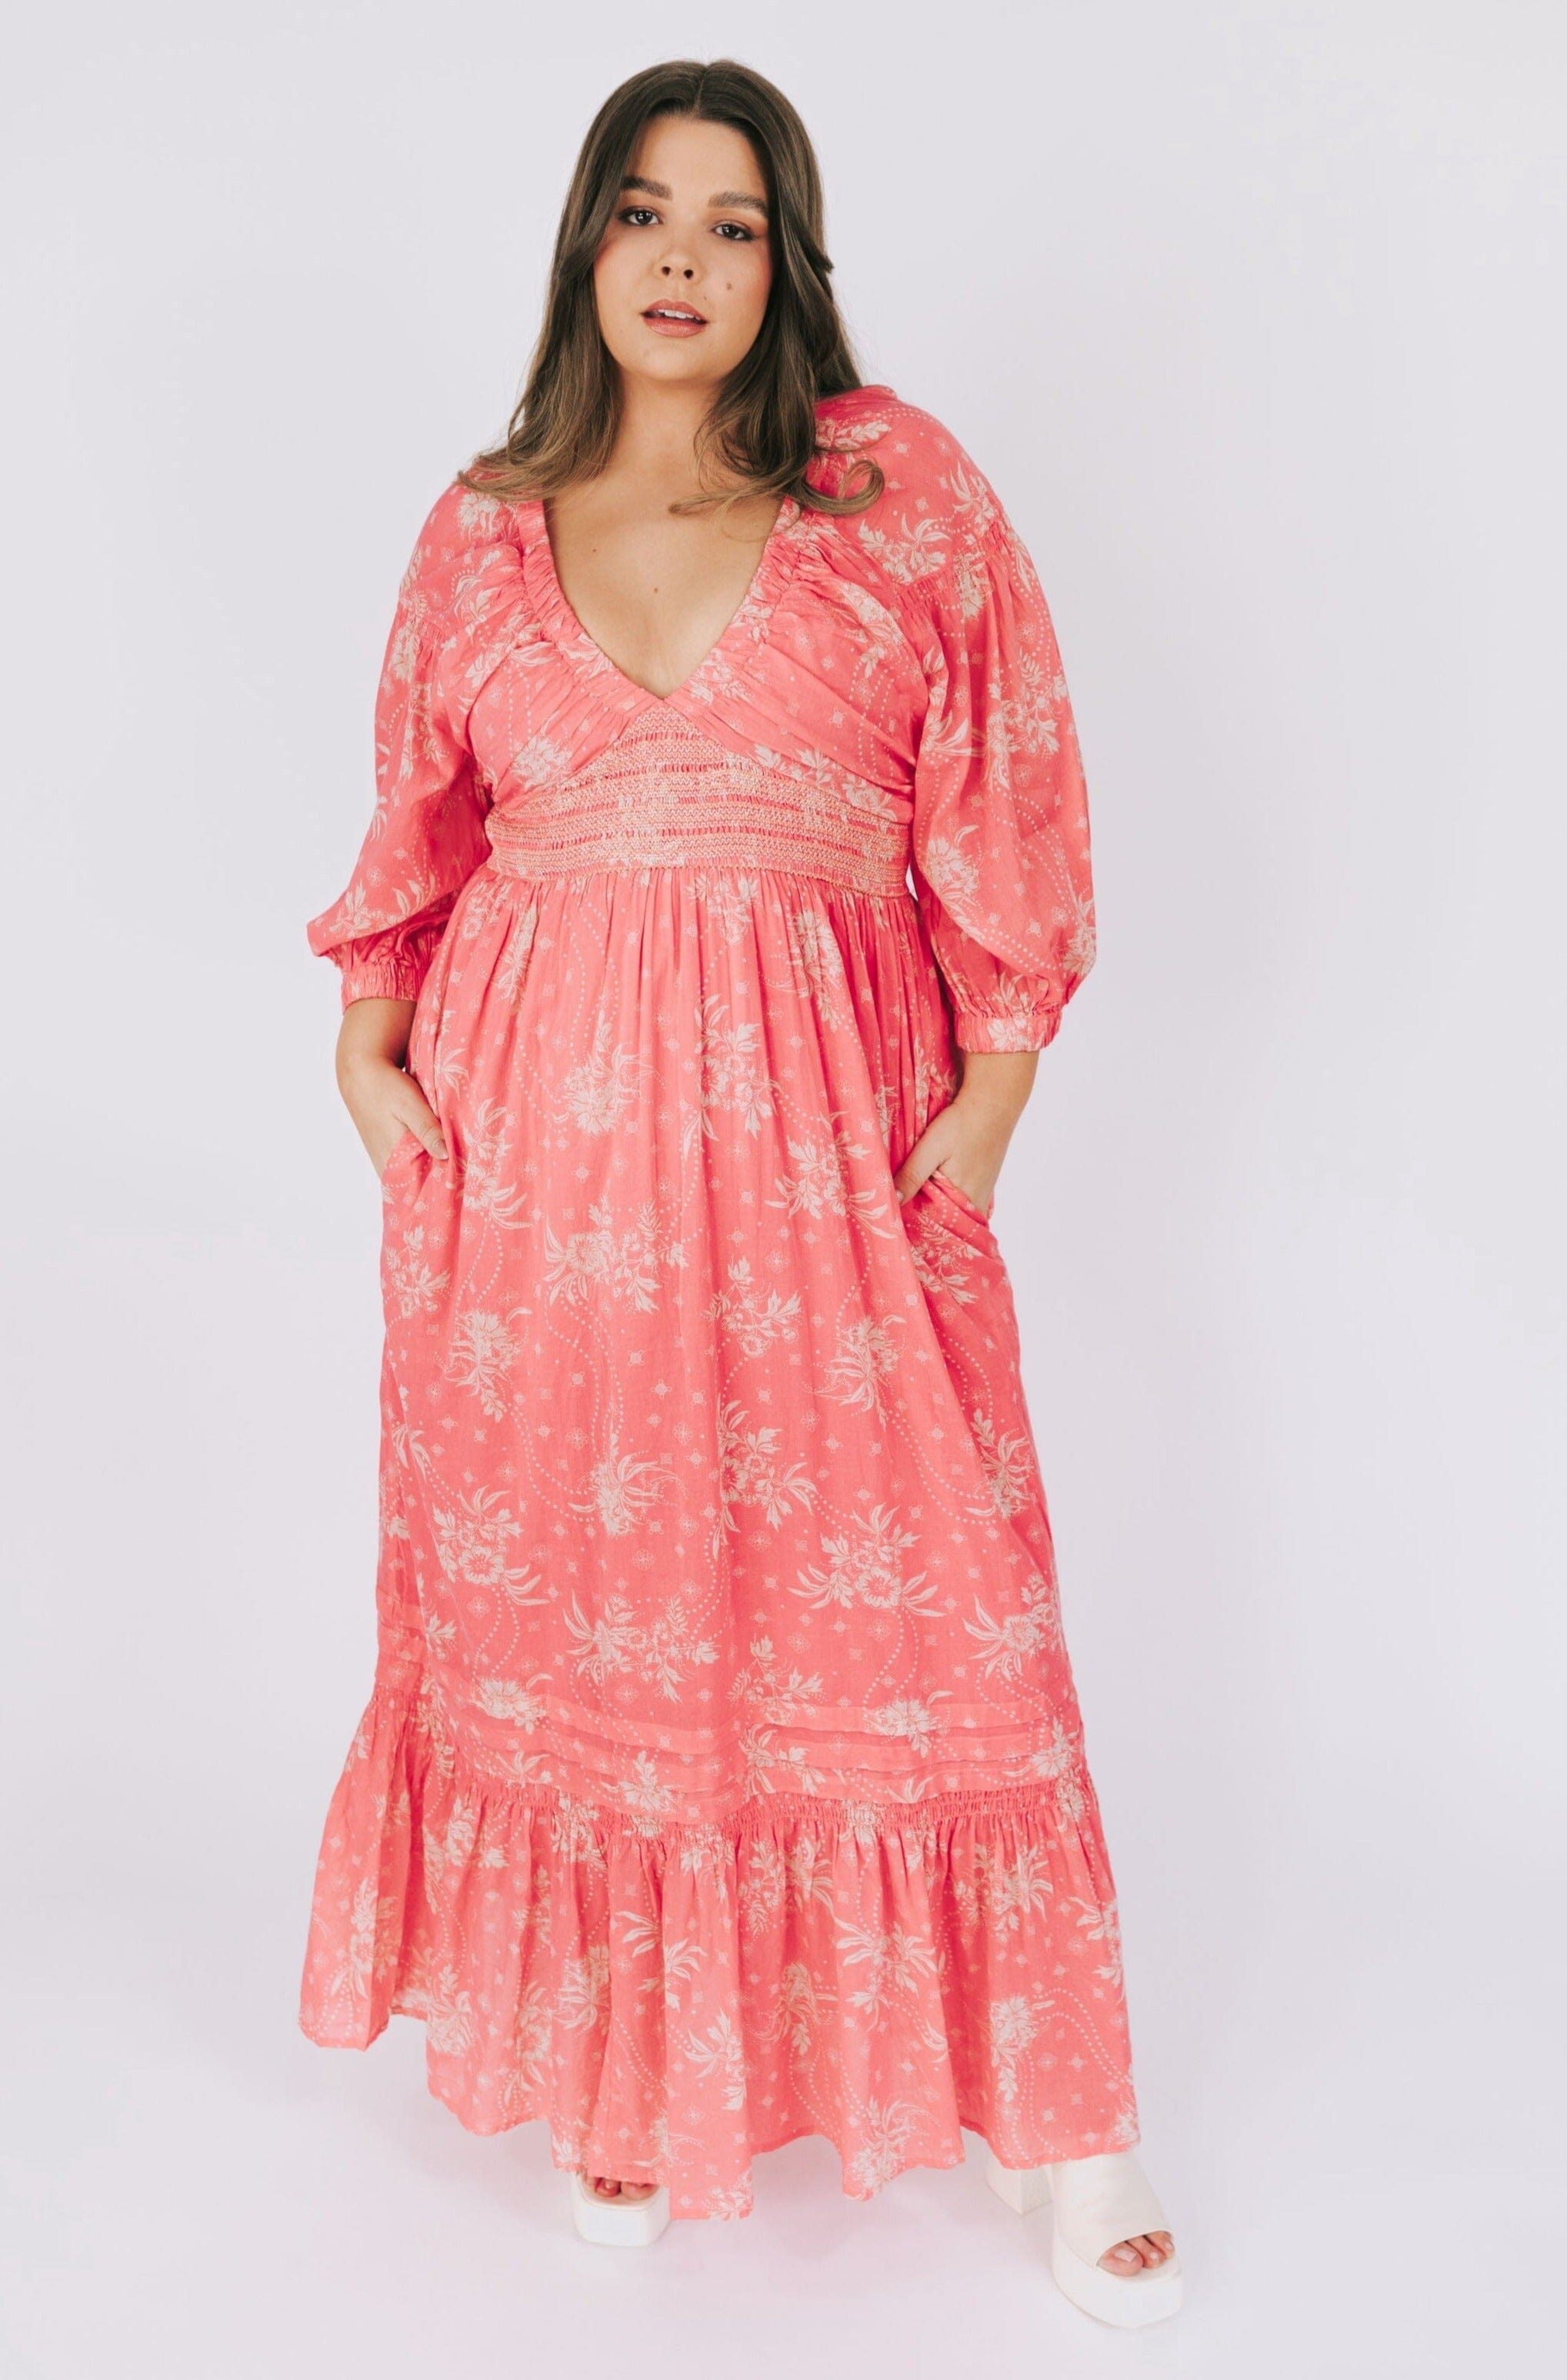 FREE PEOPLE - Golden Hour Maxi Dress - 3 Colors